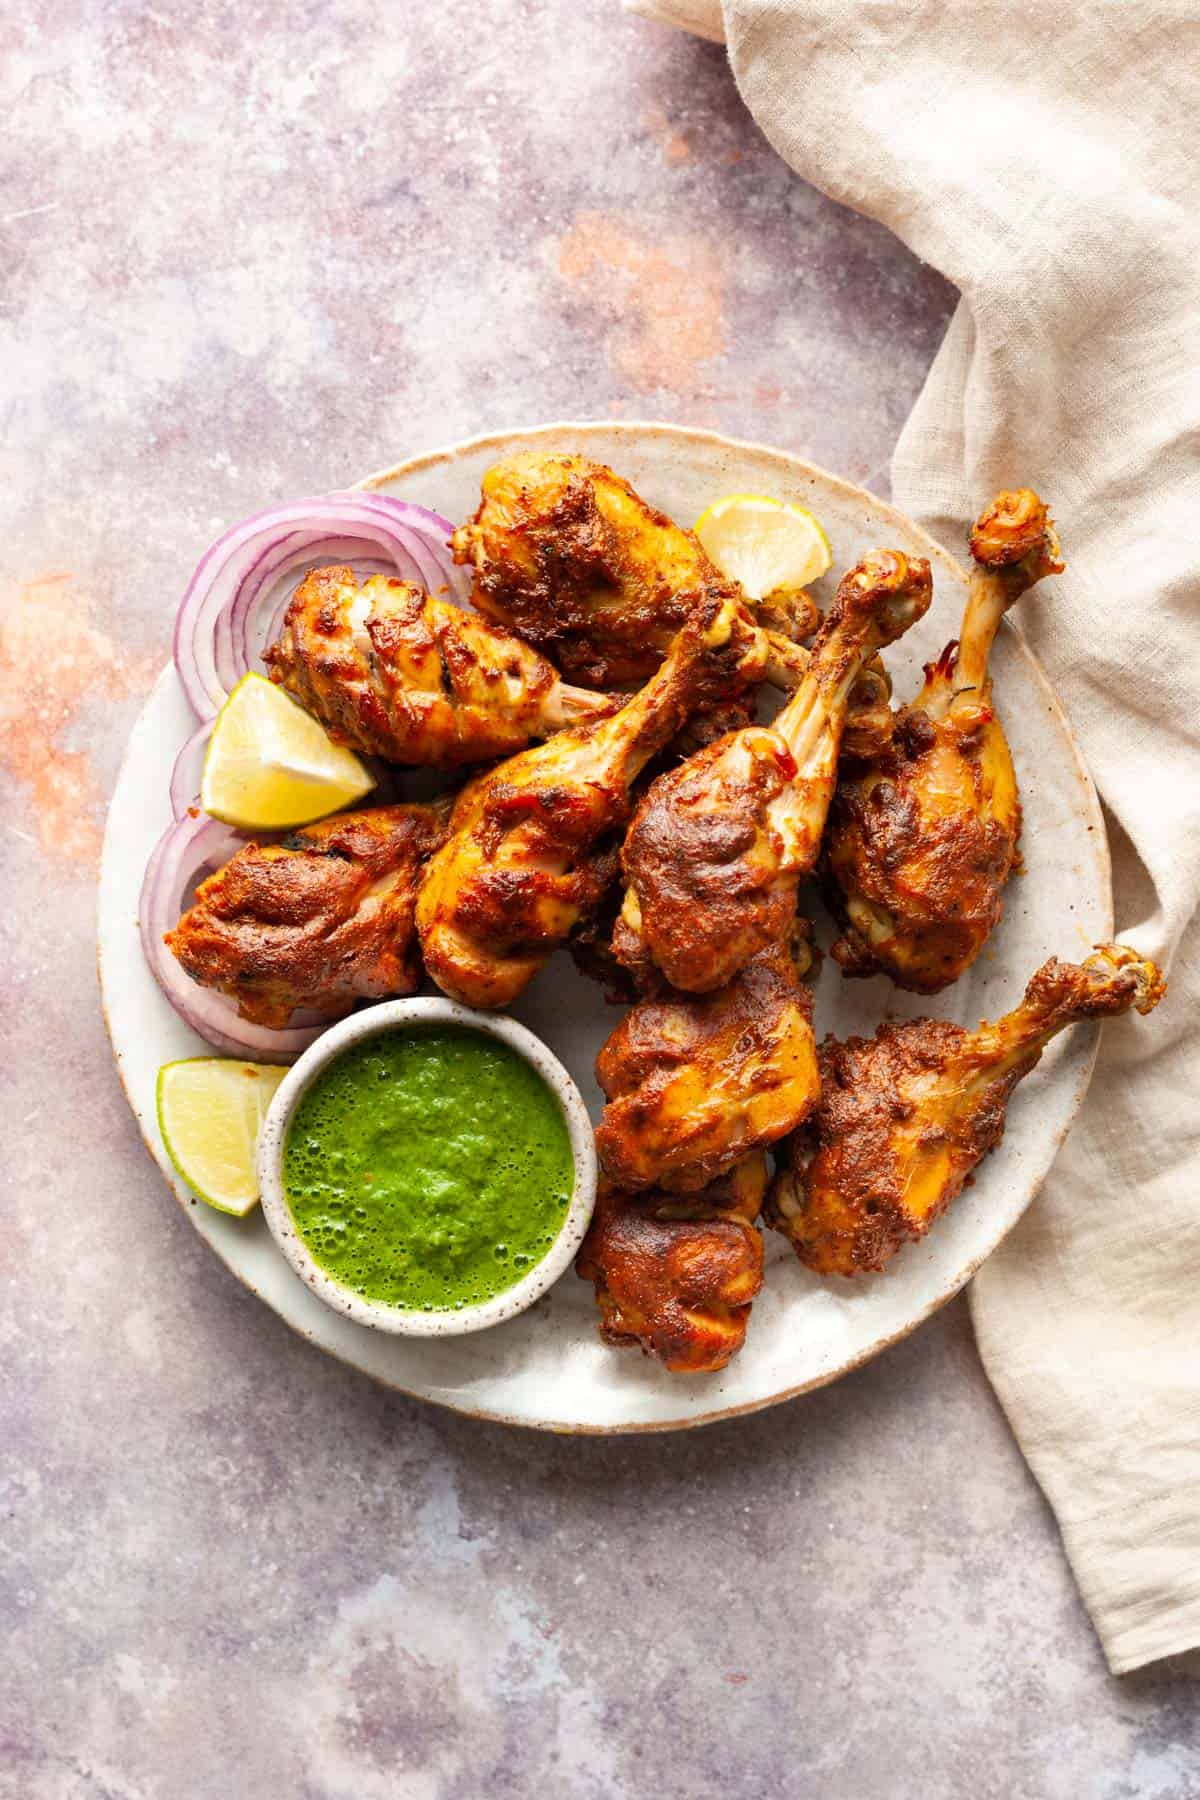 Tandoori chicken legs in a platter with cilantro chutney in a small bowl and lemon wedges.